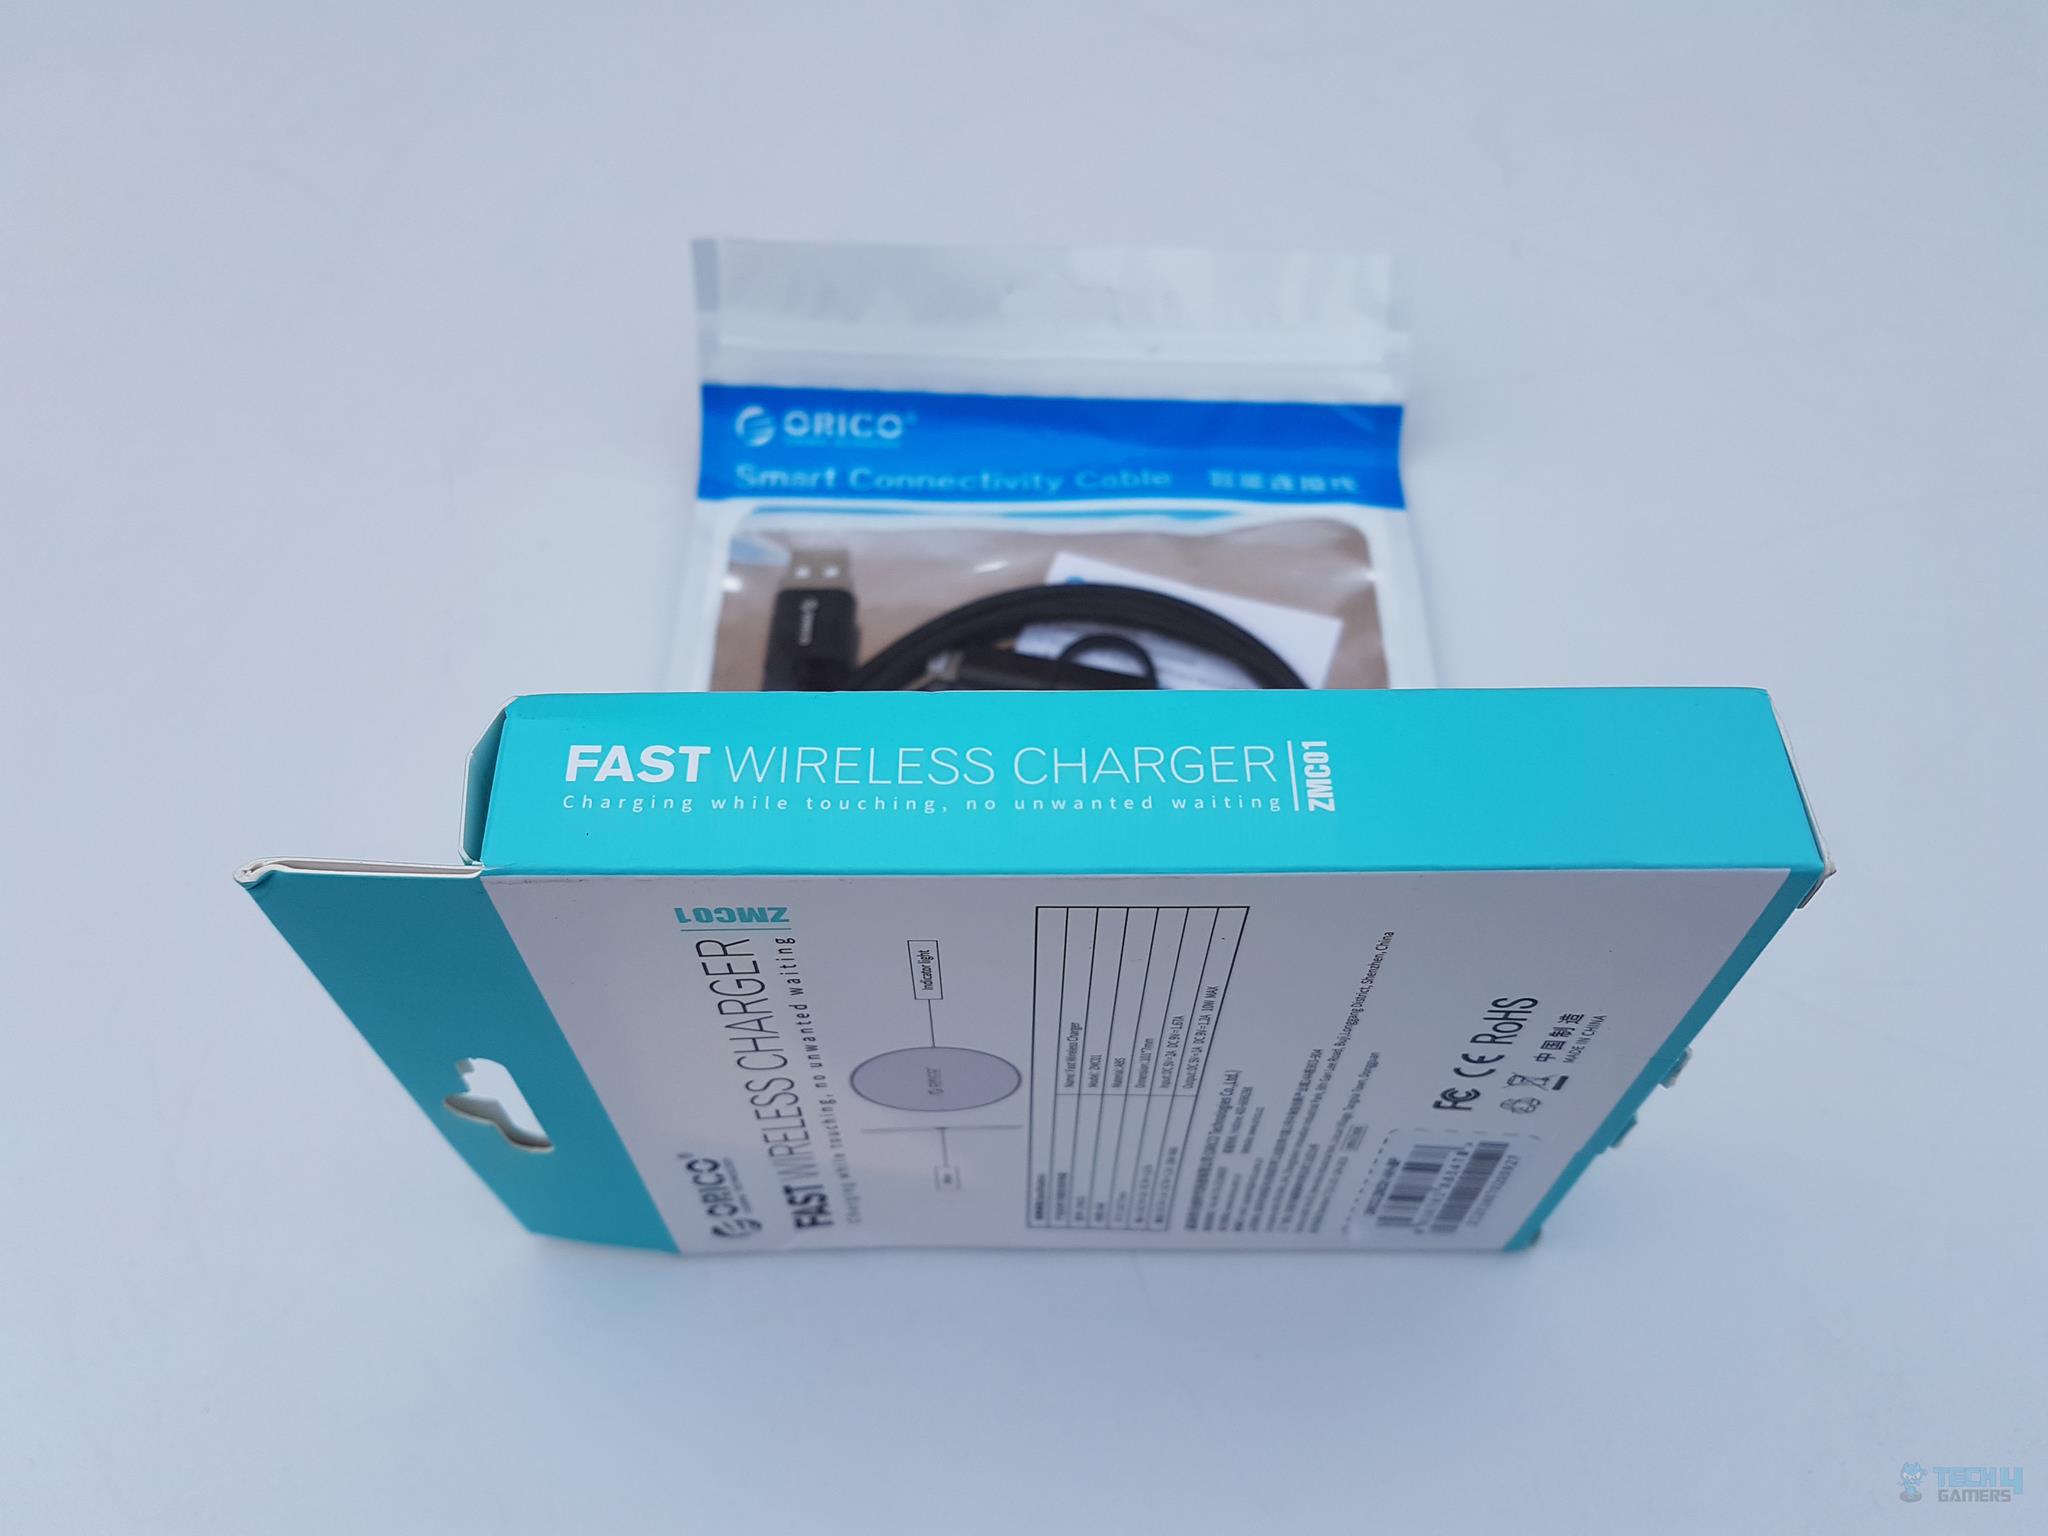 Fast Wireless Charger Right Side Packaging